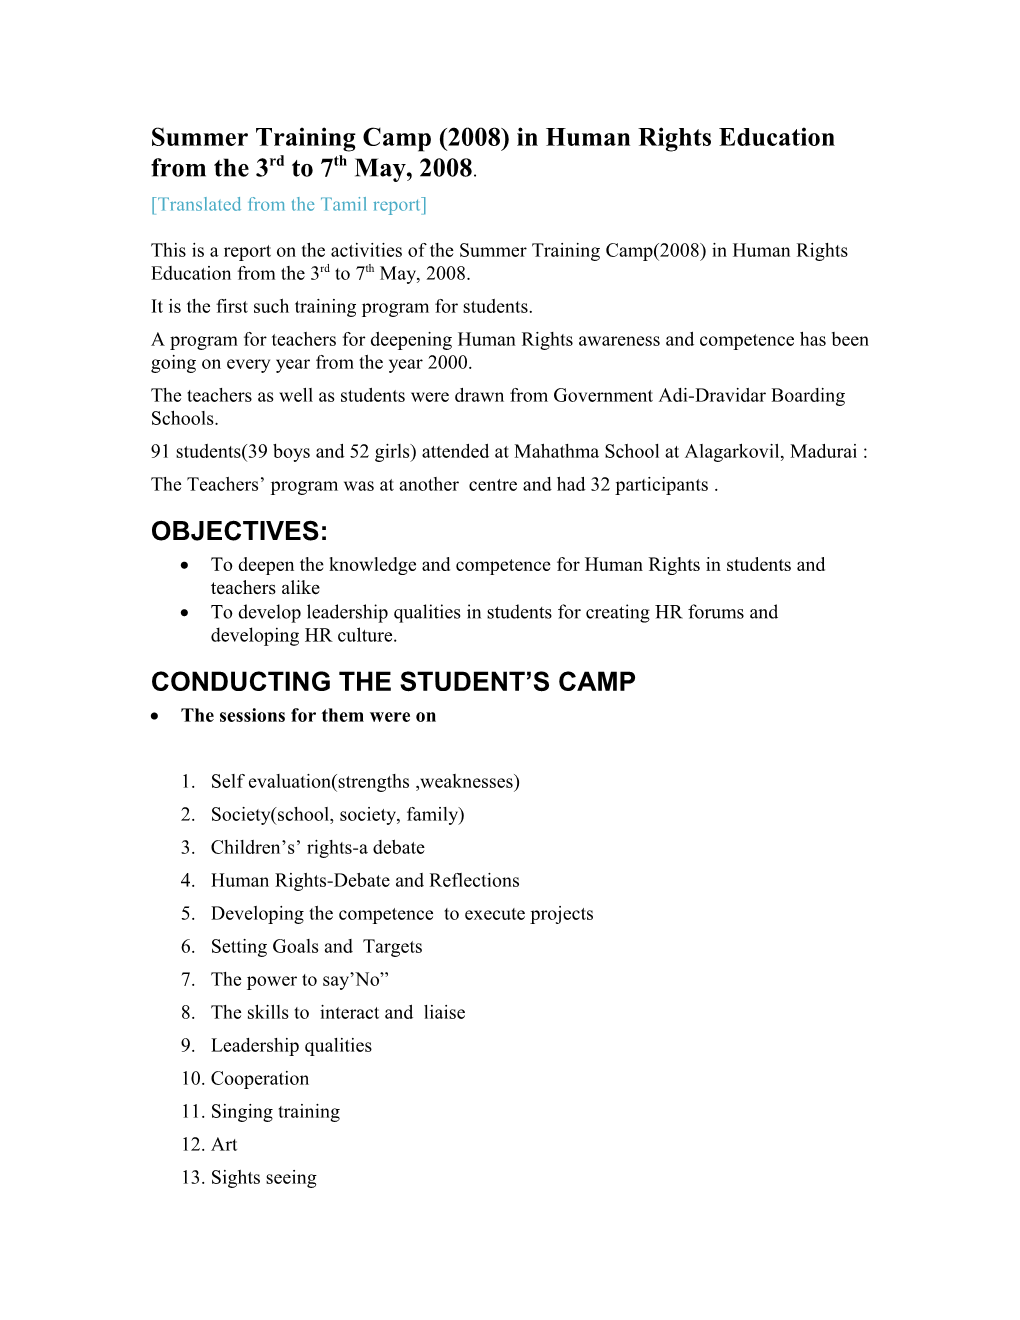 This Is a Report on the Activities of the Summer Training Camp(2008) in Human Rights Education